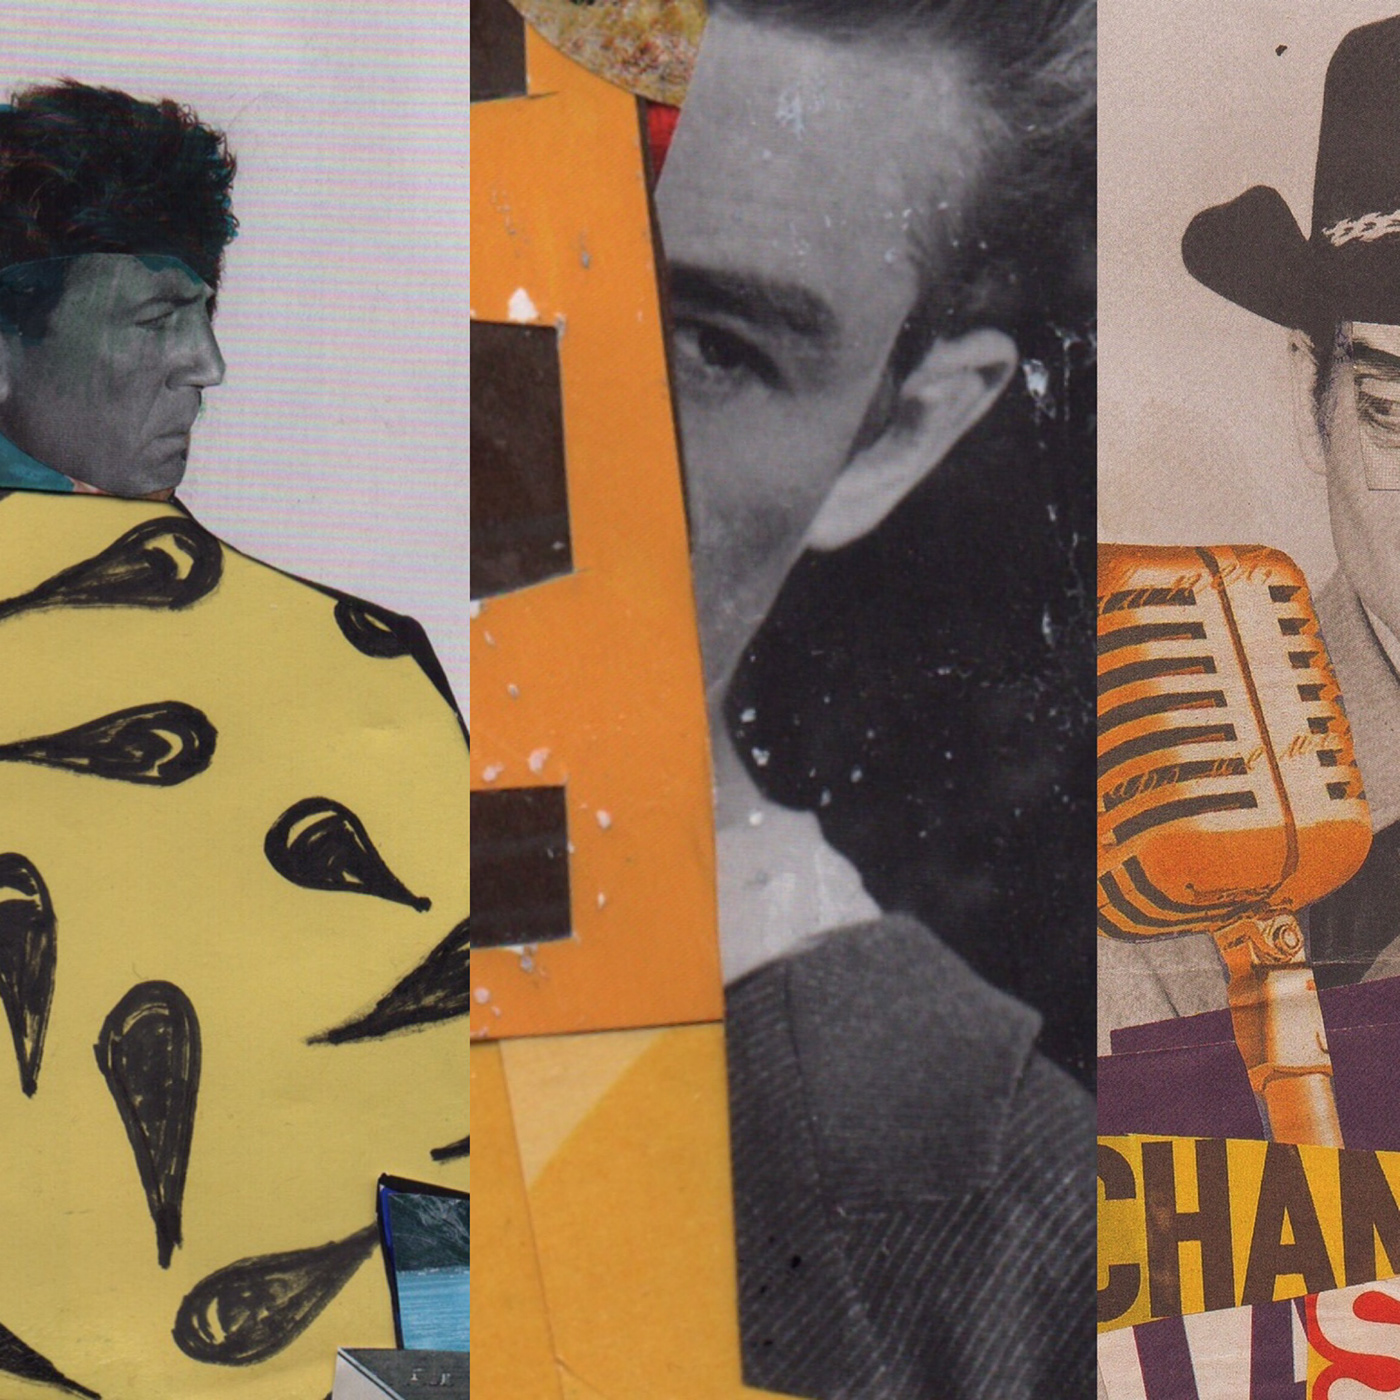 analog art collage Competition contemporary contest Faded fragments pop portraits Silhouettes Torsi Retro